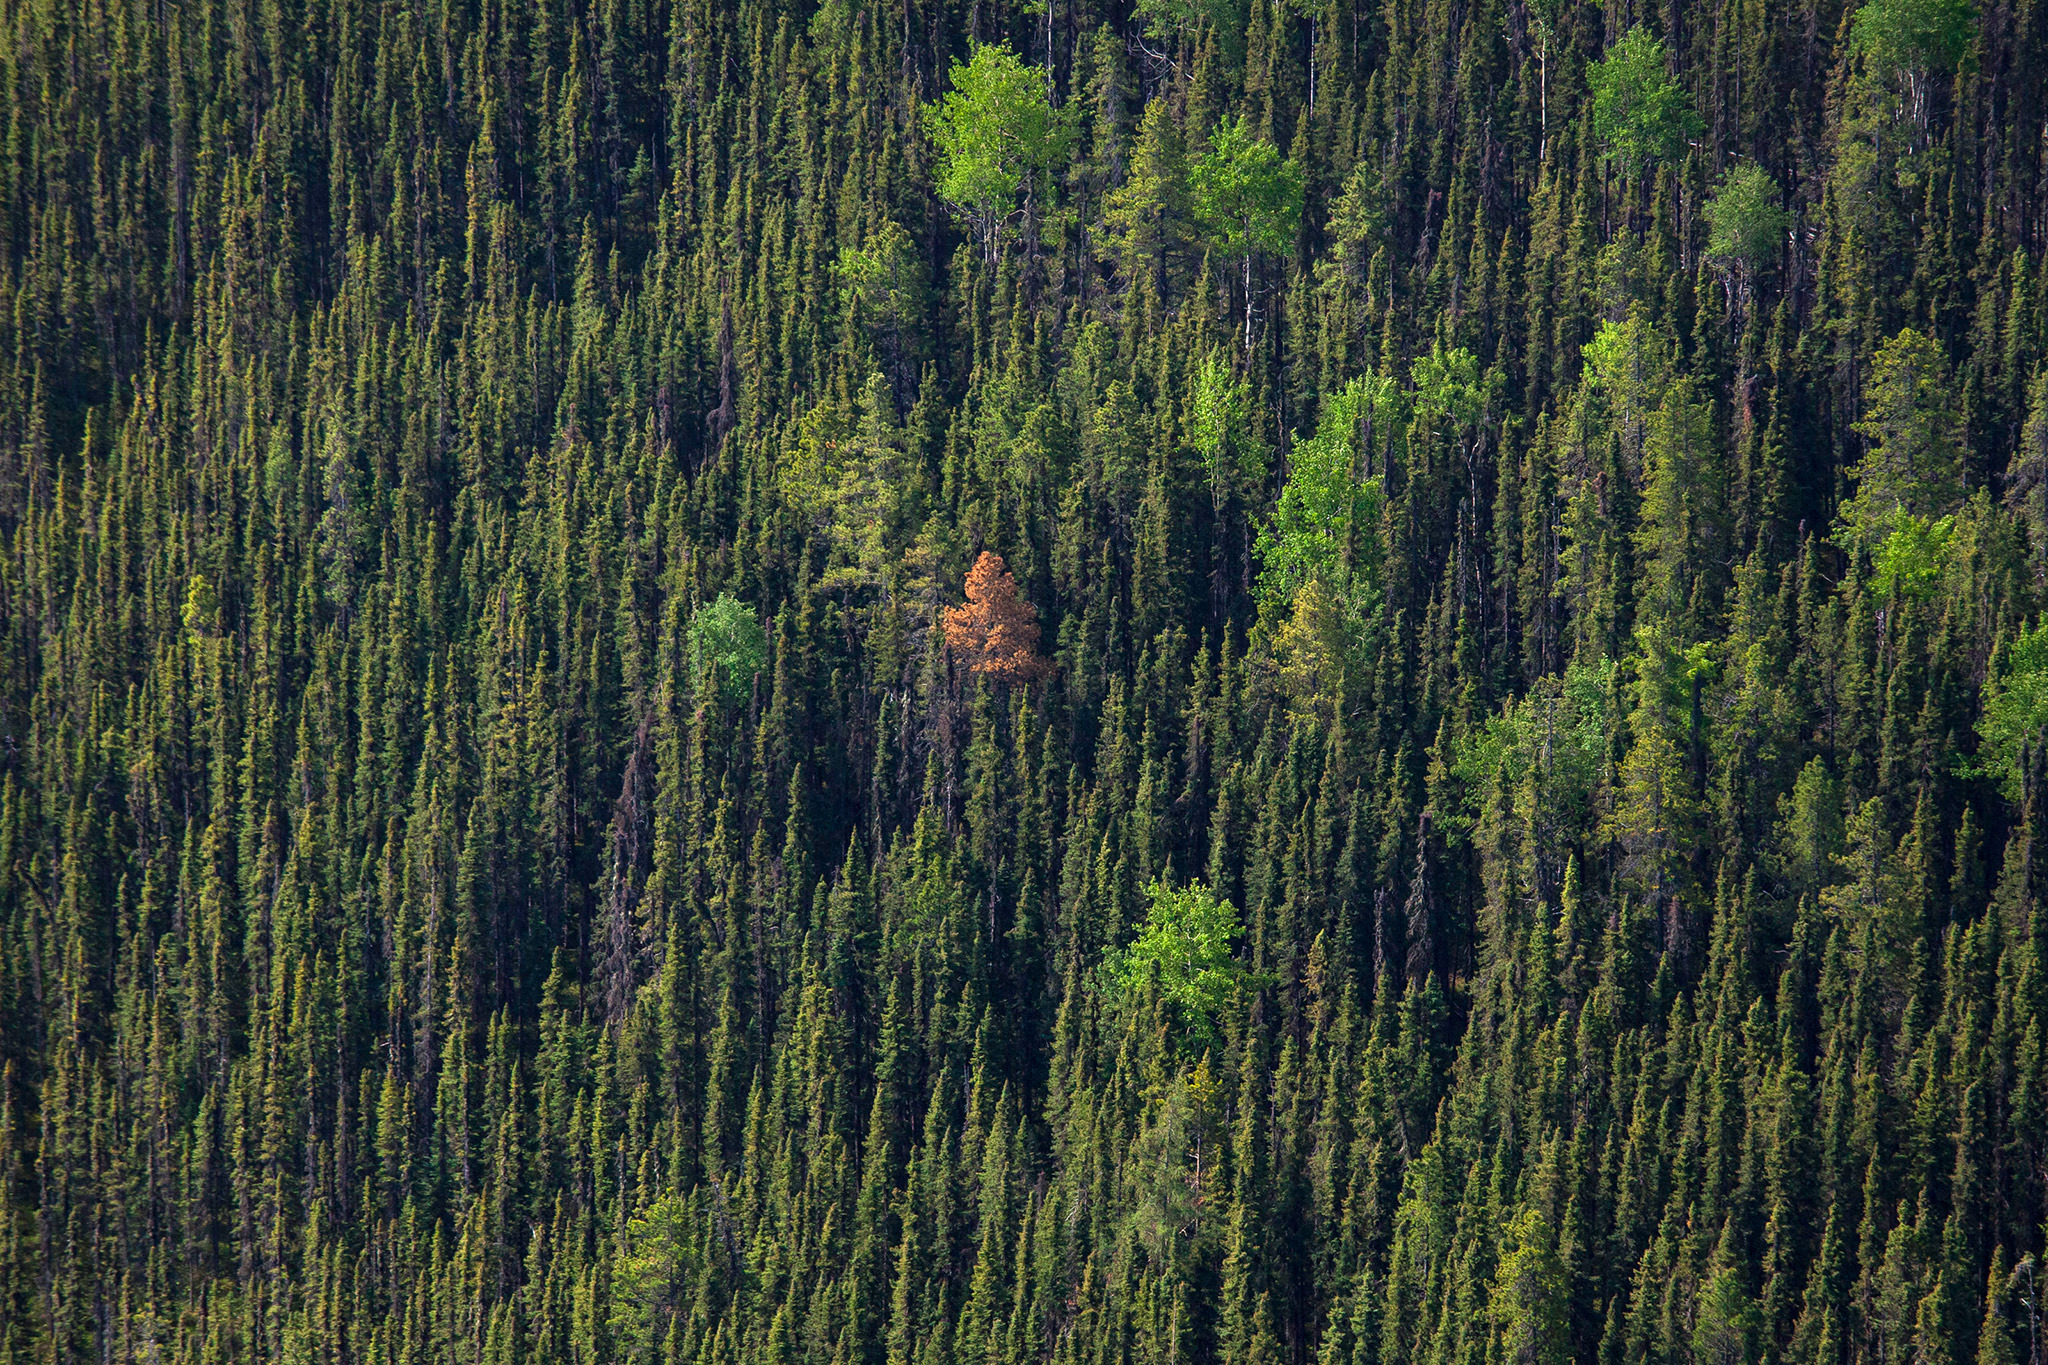 What's Killing Canada's Pine Trees? - Bloomberg